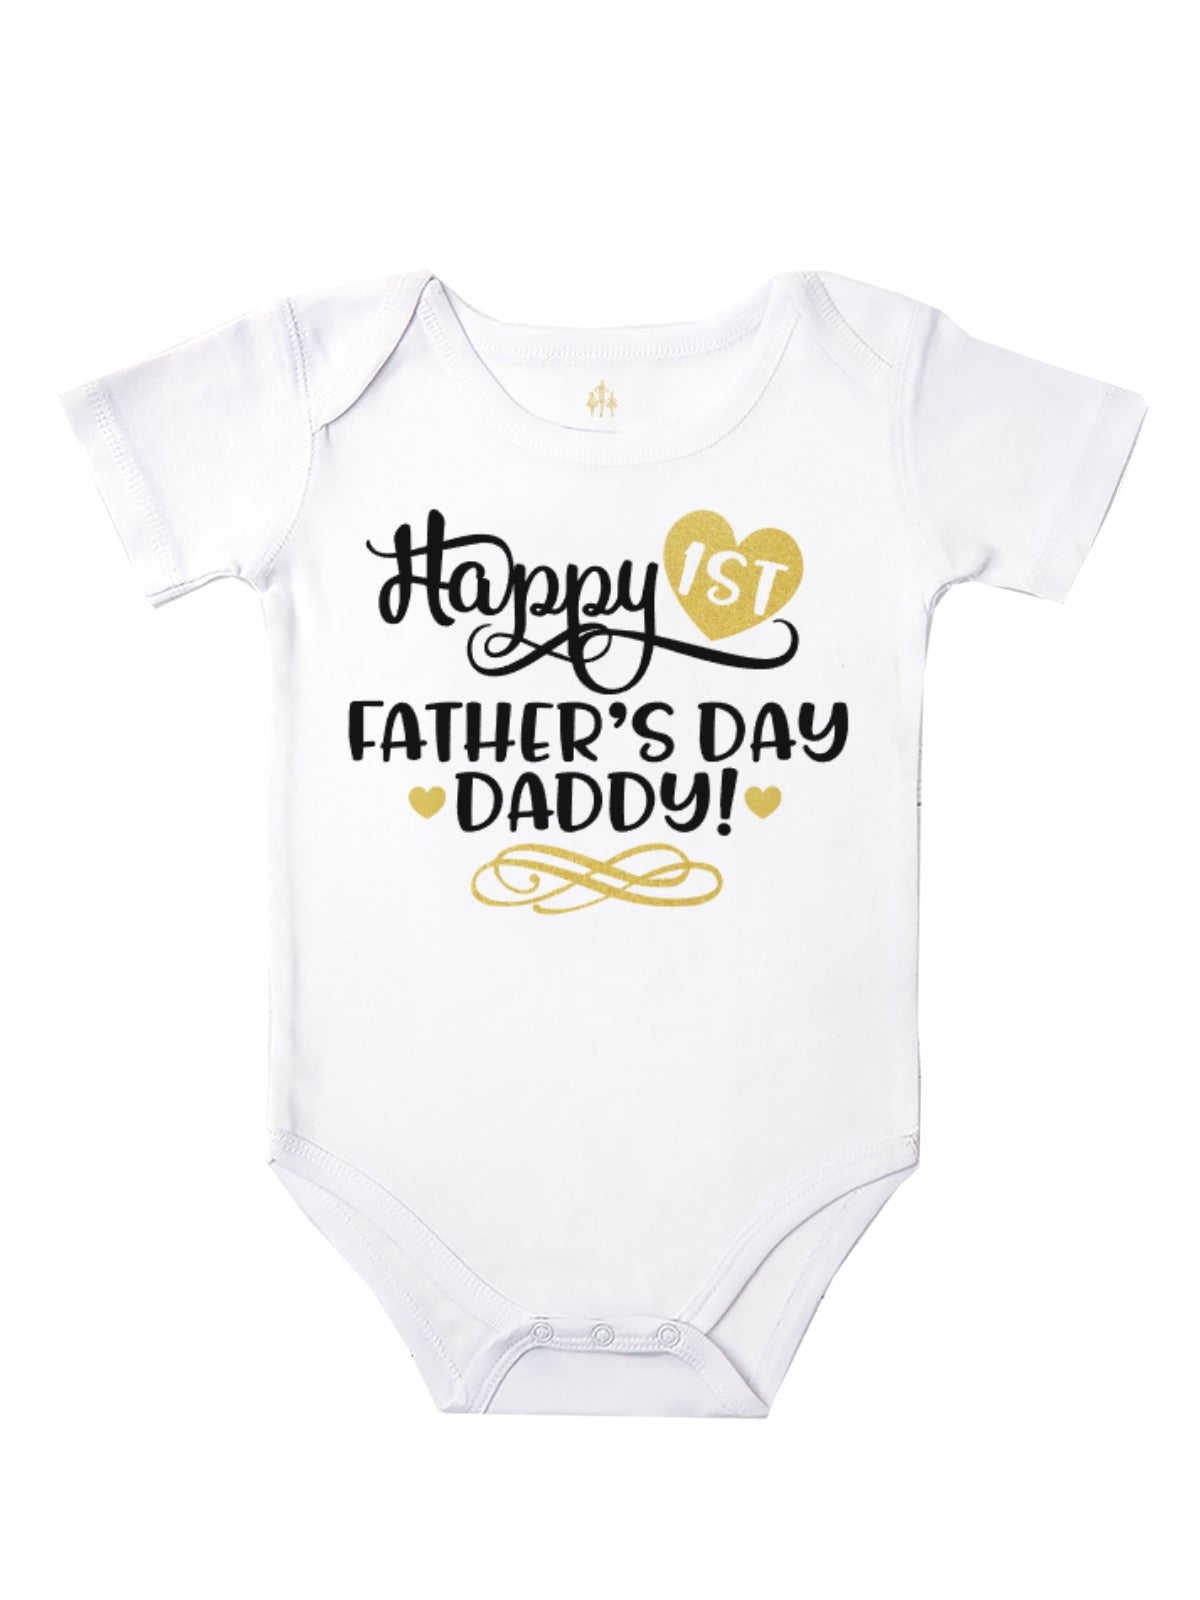 Happy 1st Father's Day Daddy Tutu Outfit in Black and Gold